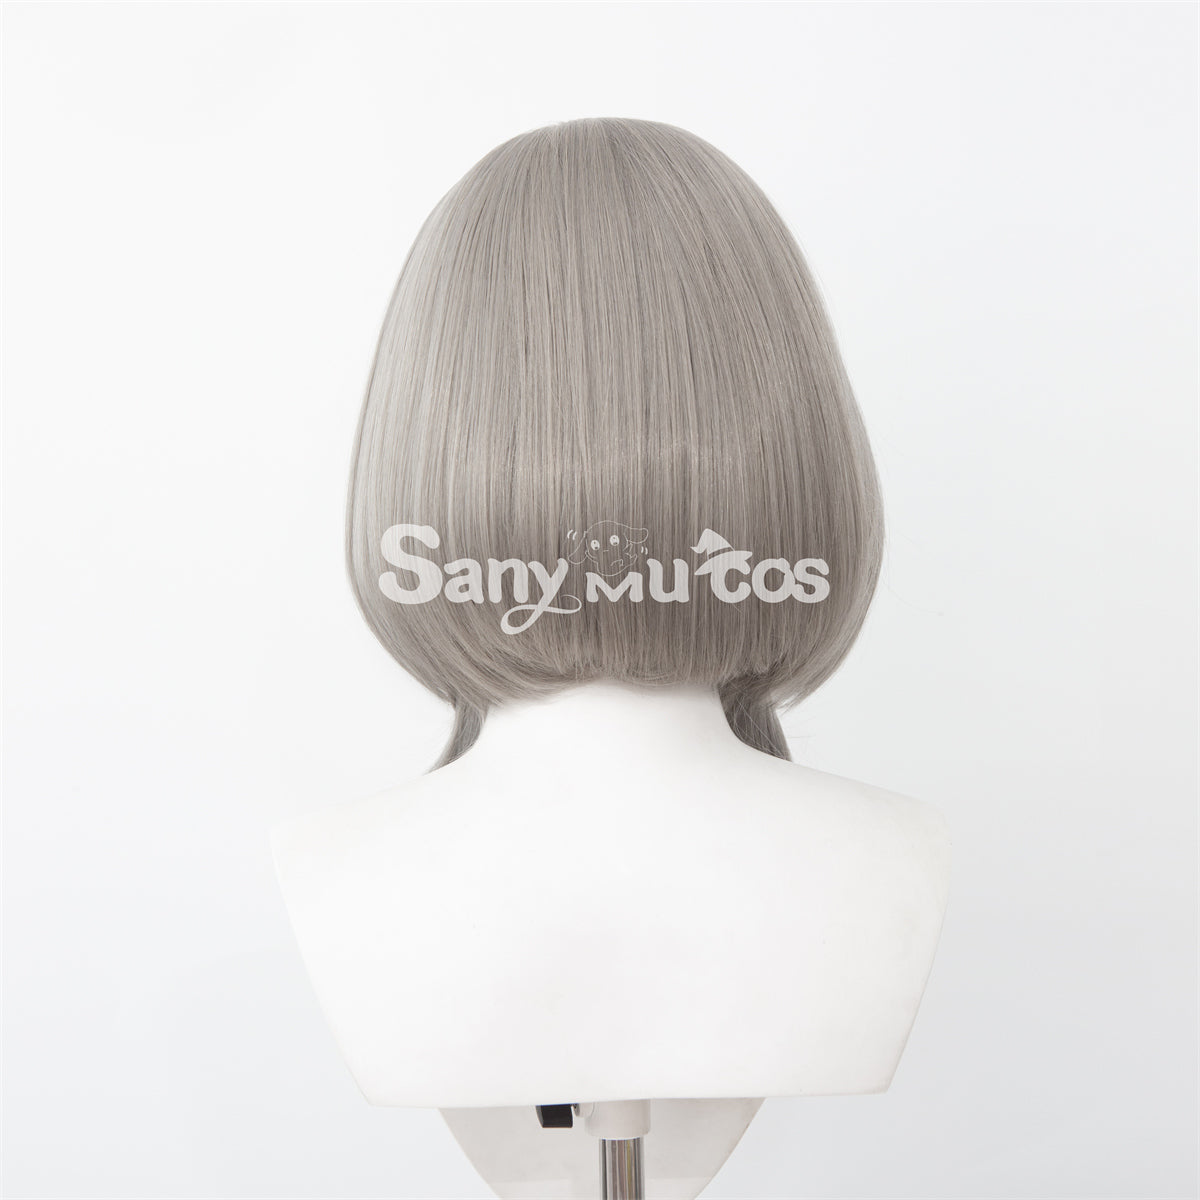 Game Genshin Impact cosplay Marionette Sandrone cosplay wig